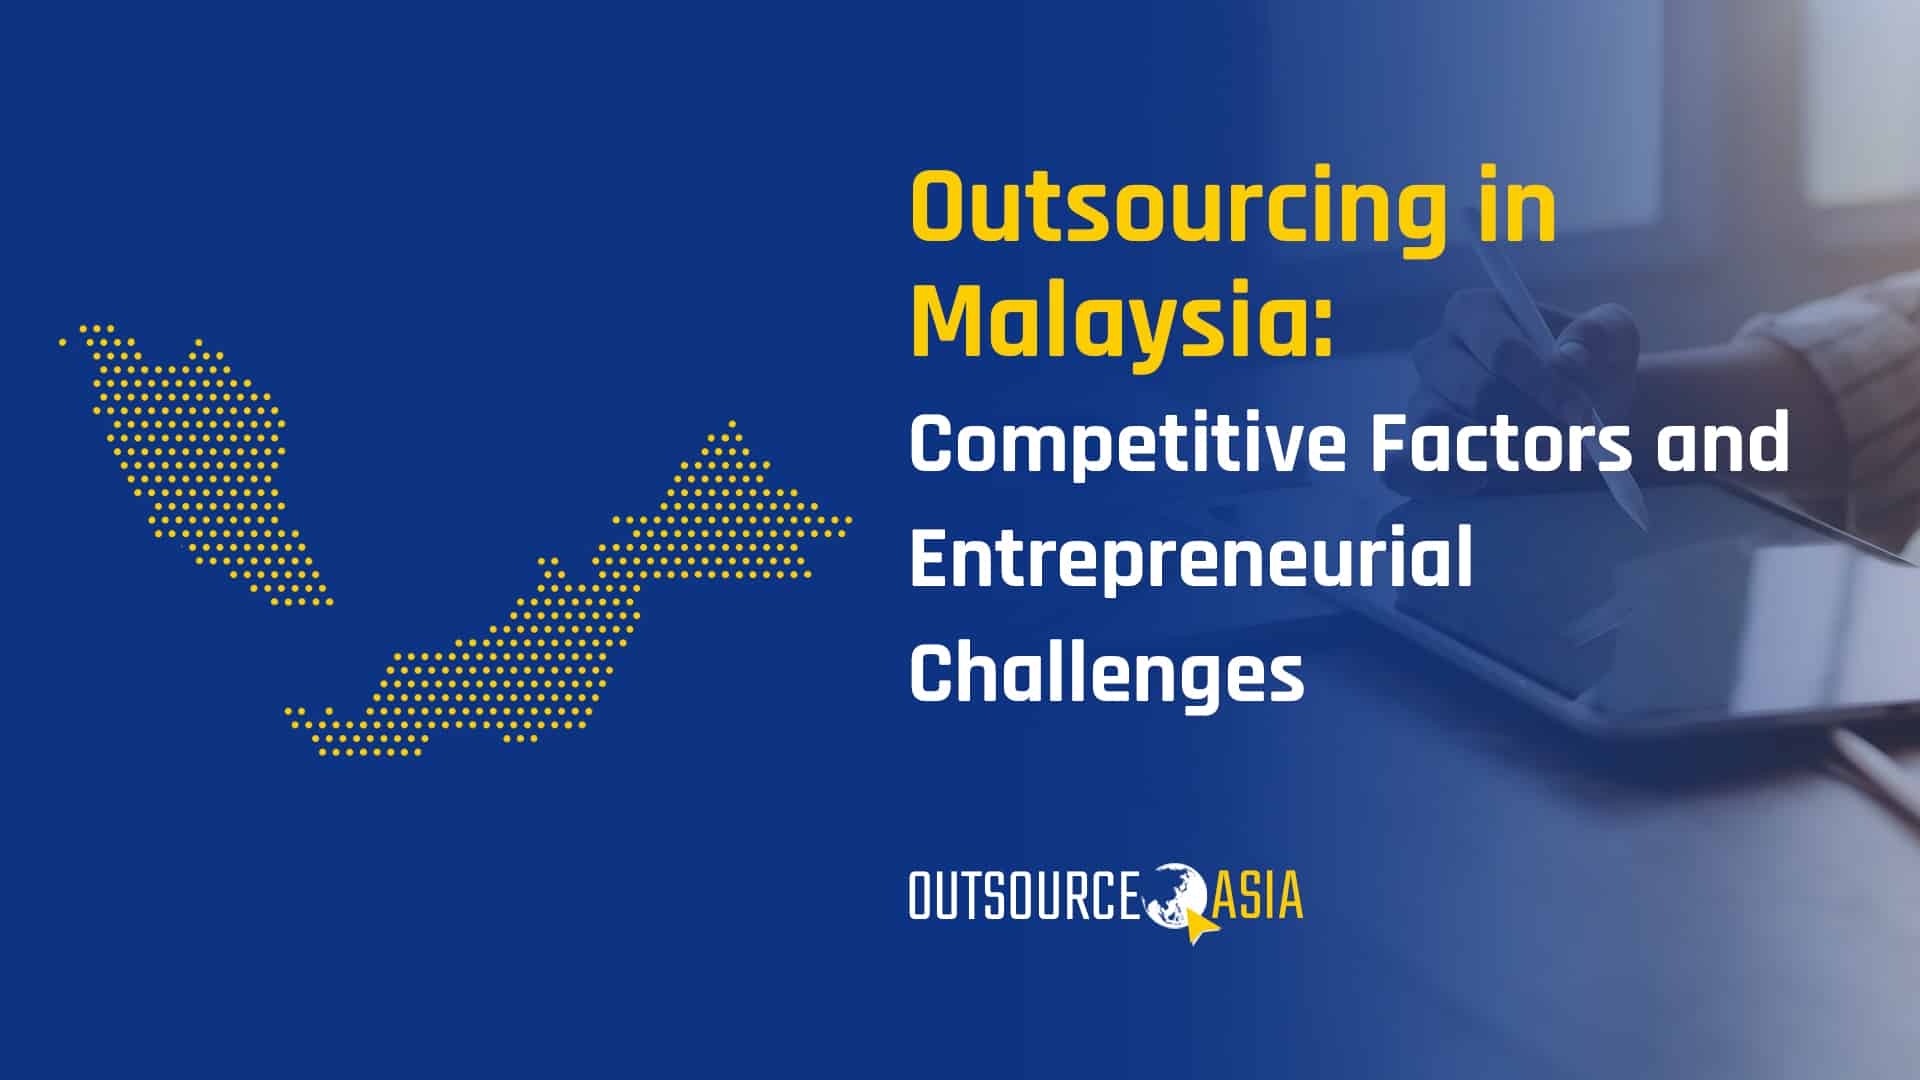 Outsourcing in Malaysia